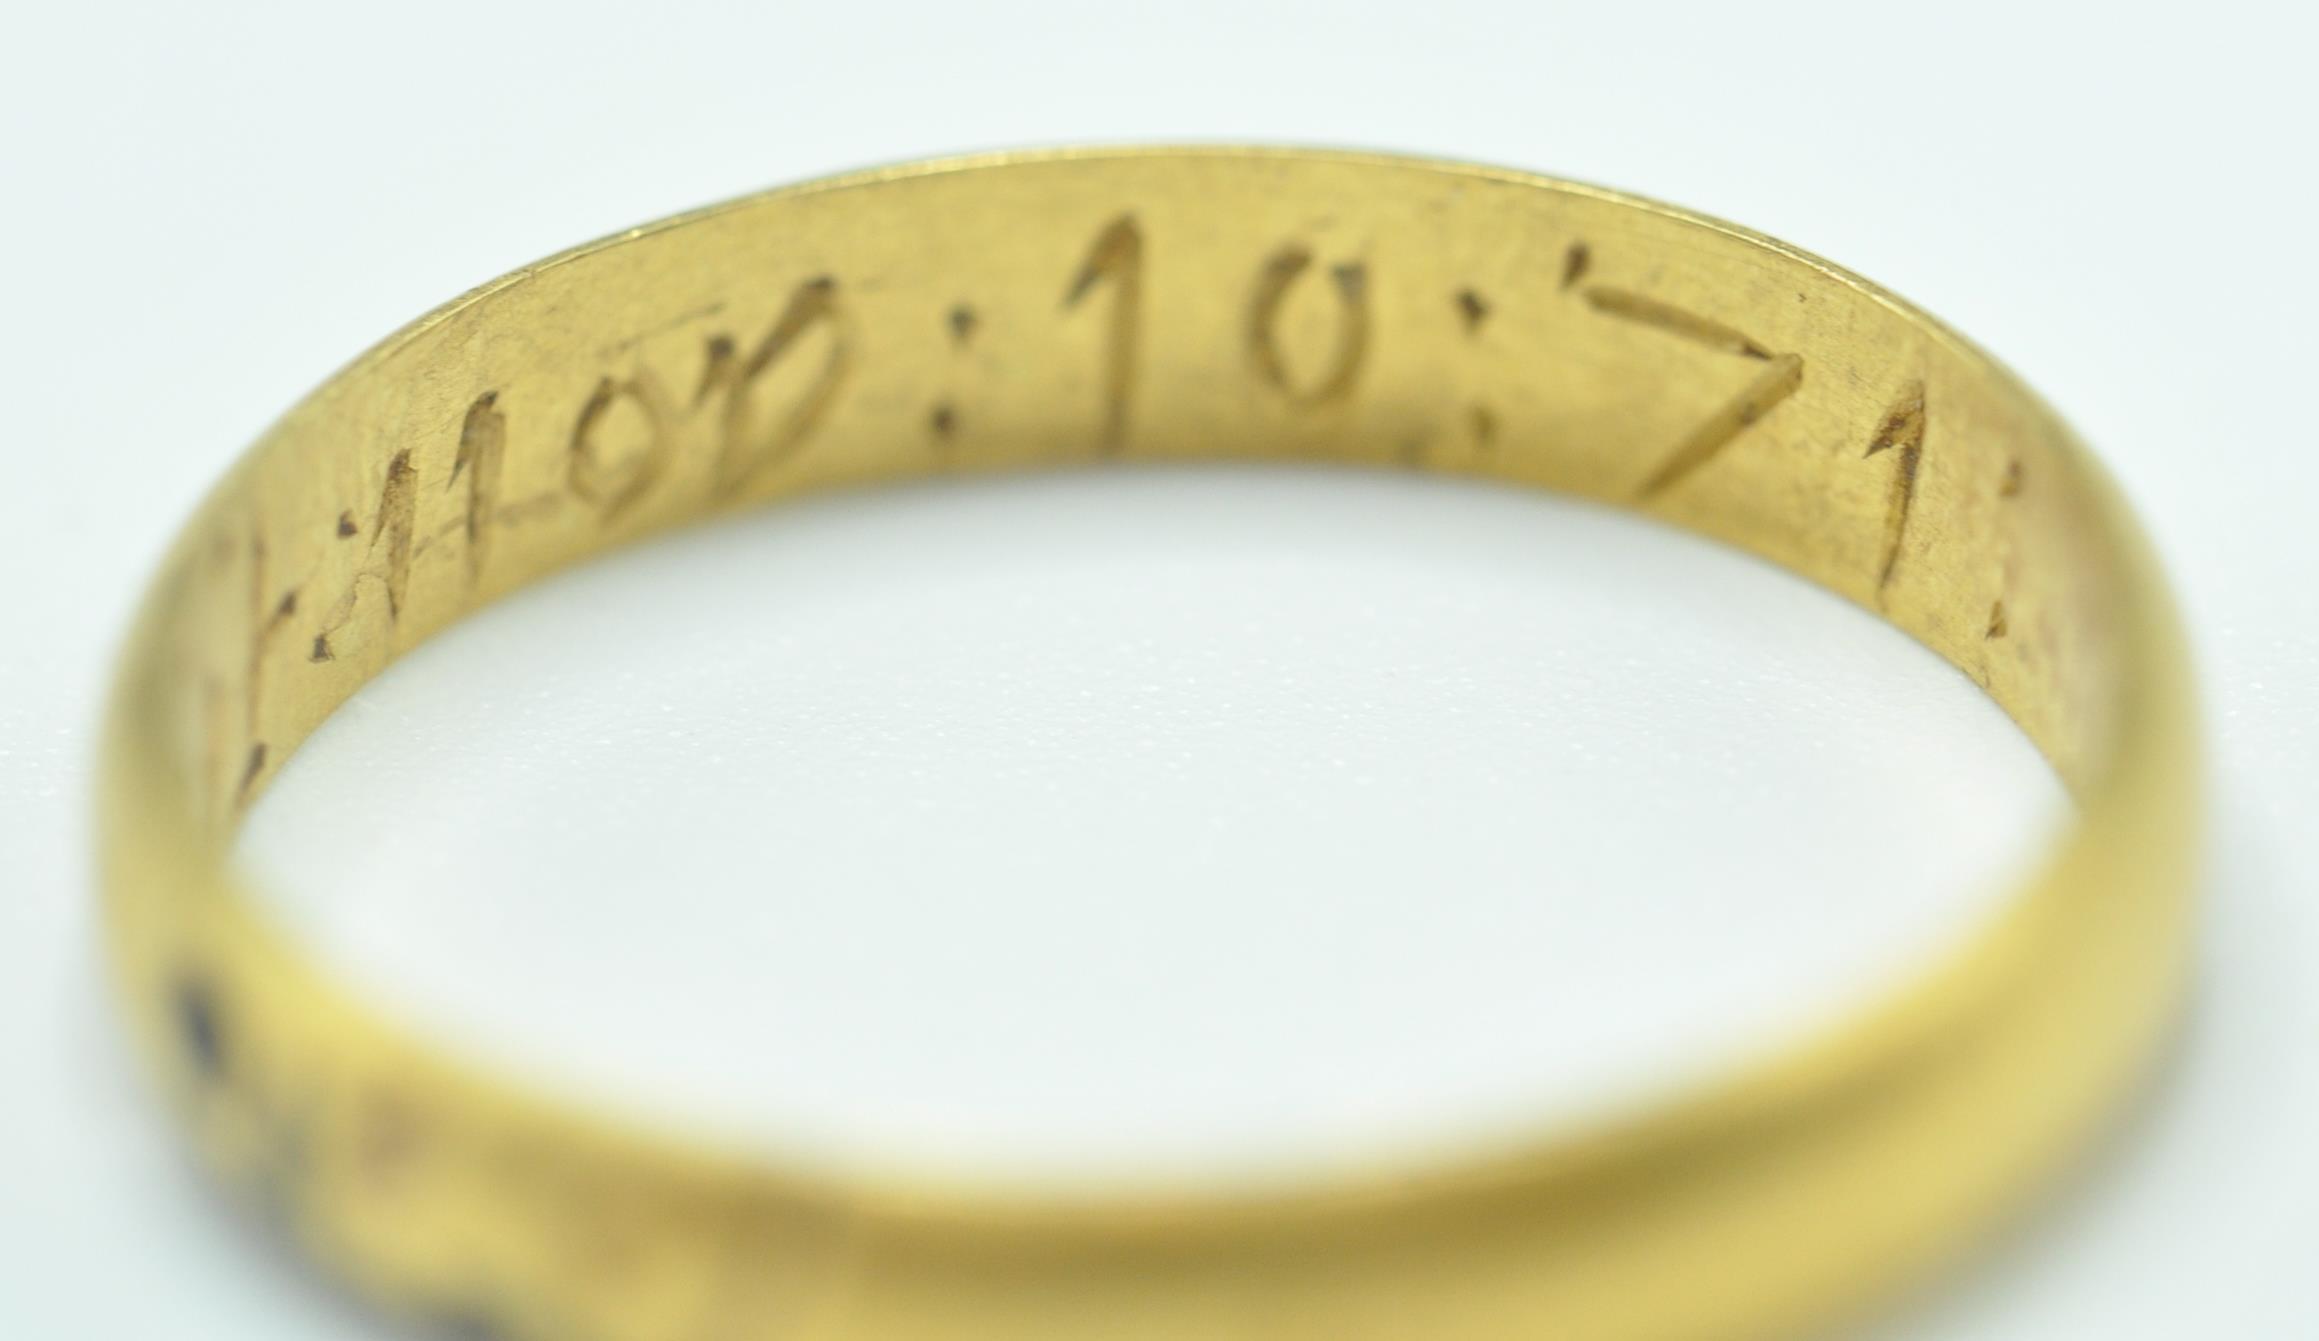 GEORGIAN GOLD MOMENTRO MORI MOURNING RING WITH SKULL - Image 8 of 9